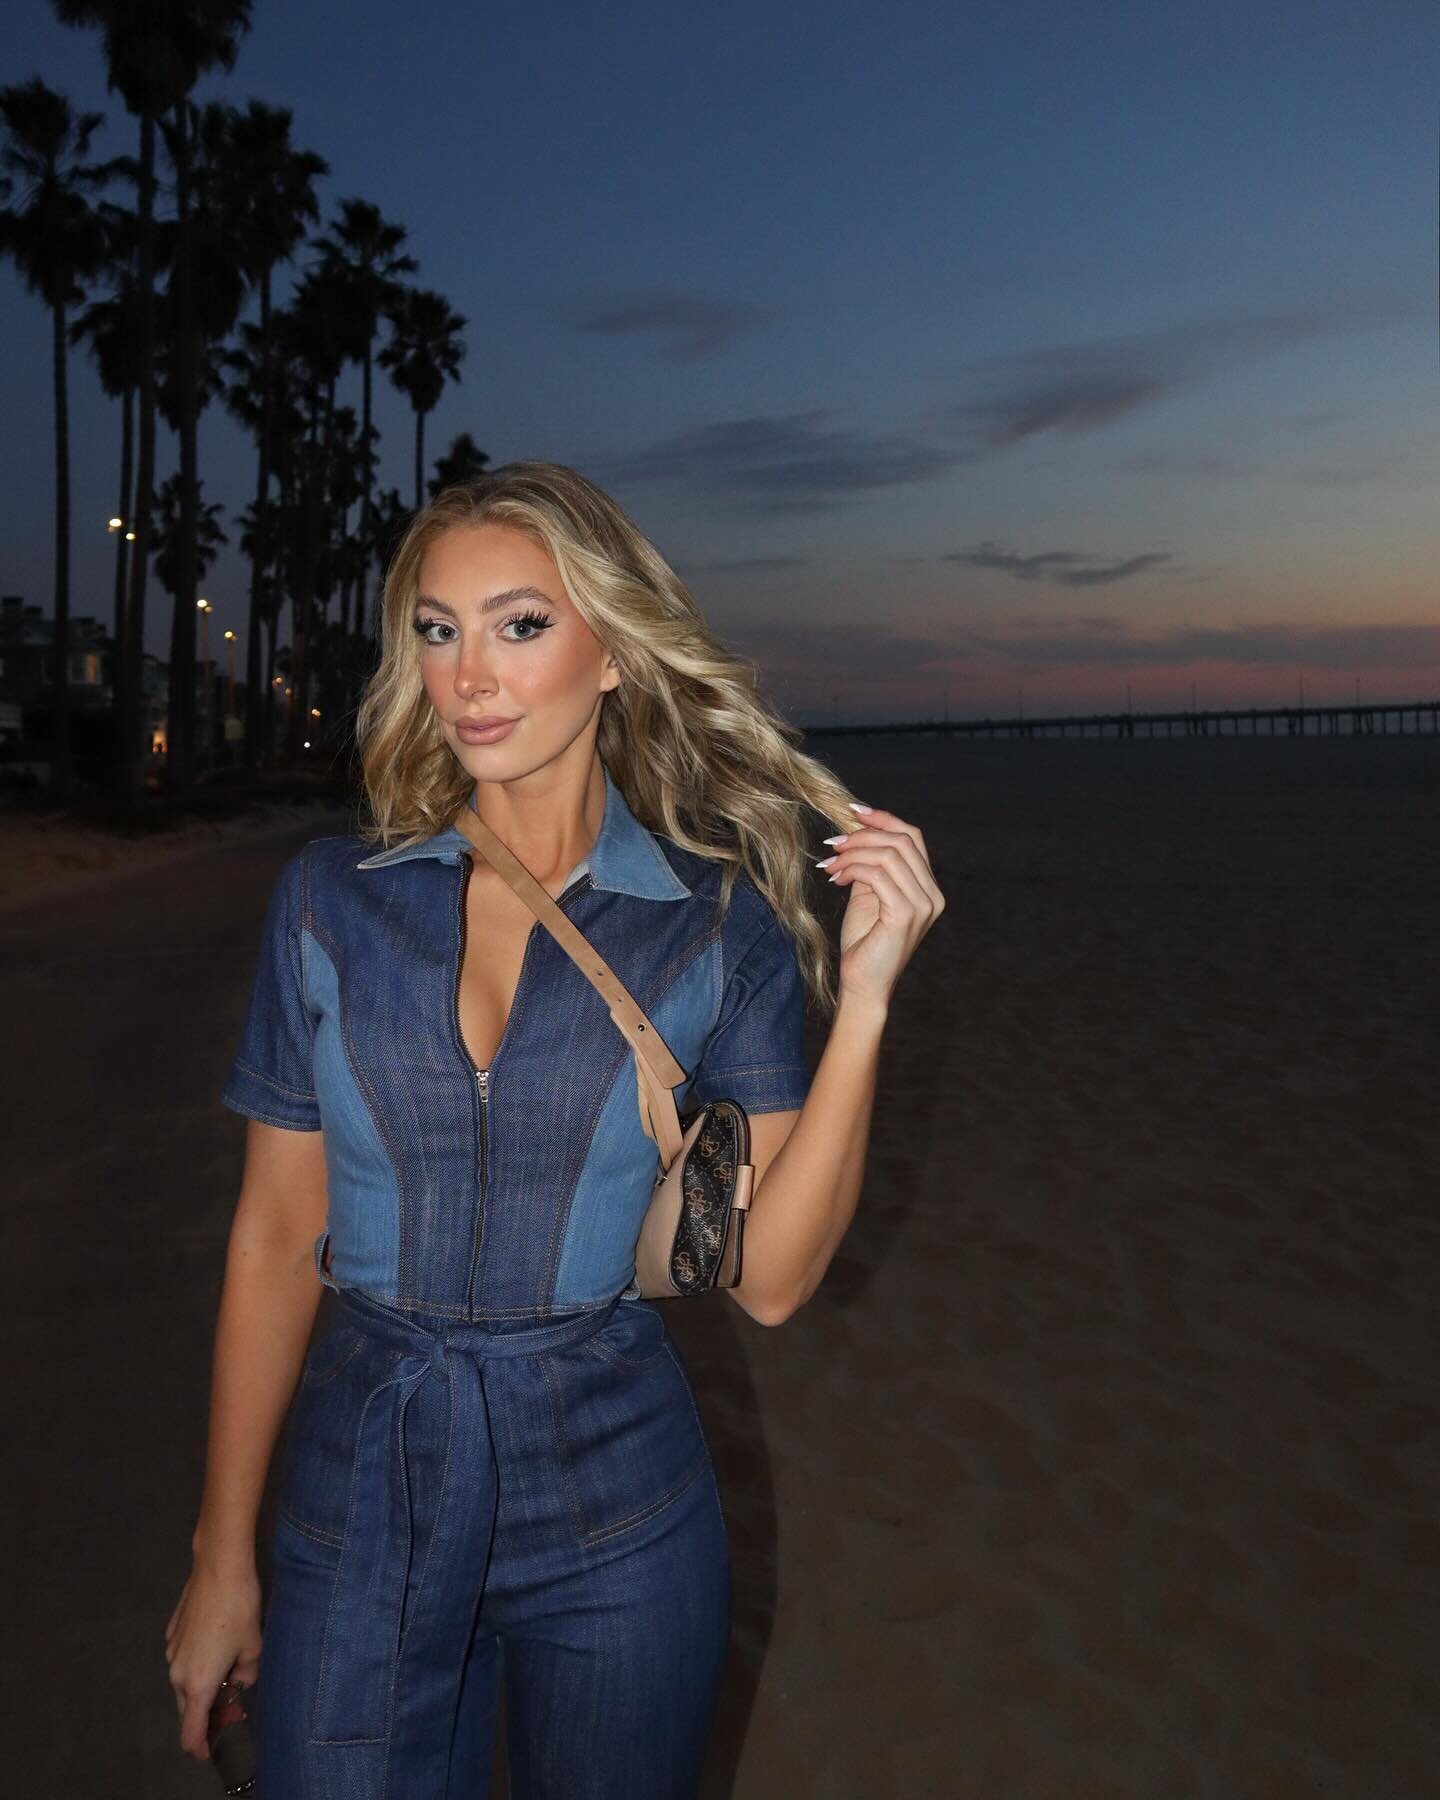 working on her night moves 🌴⚡️

70s fashion, 70s style, ROLLERSKATING, denim jumpsuit outfit, blonde, model, Los Angeles, Venice beach